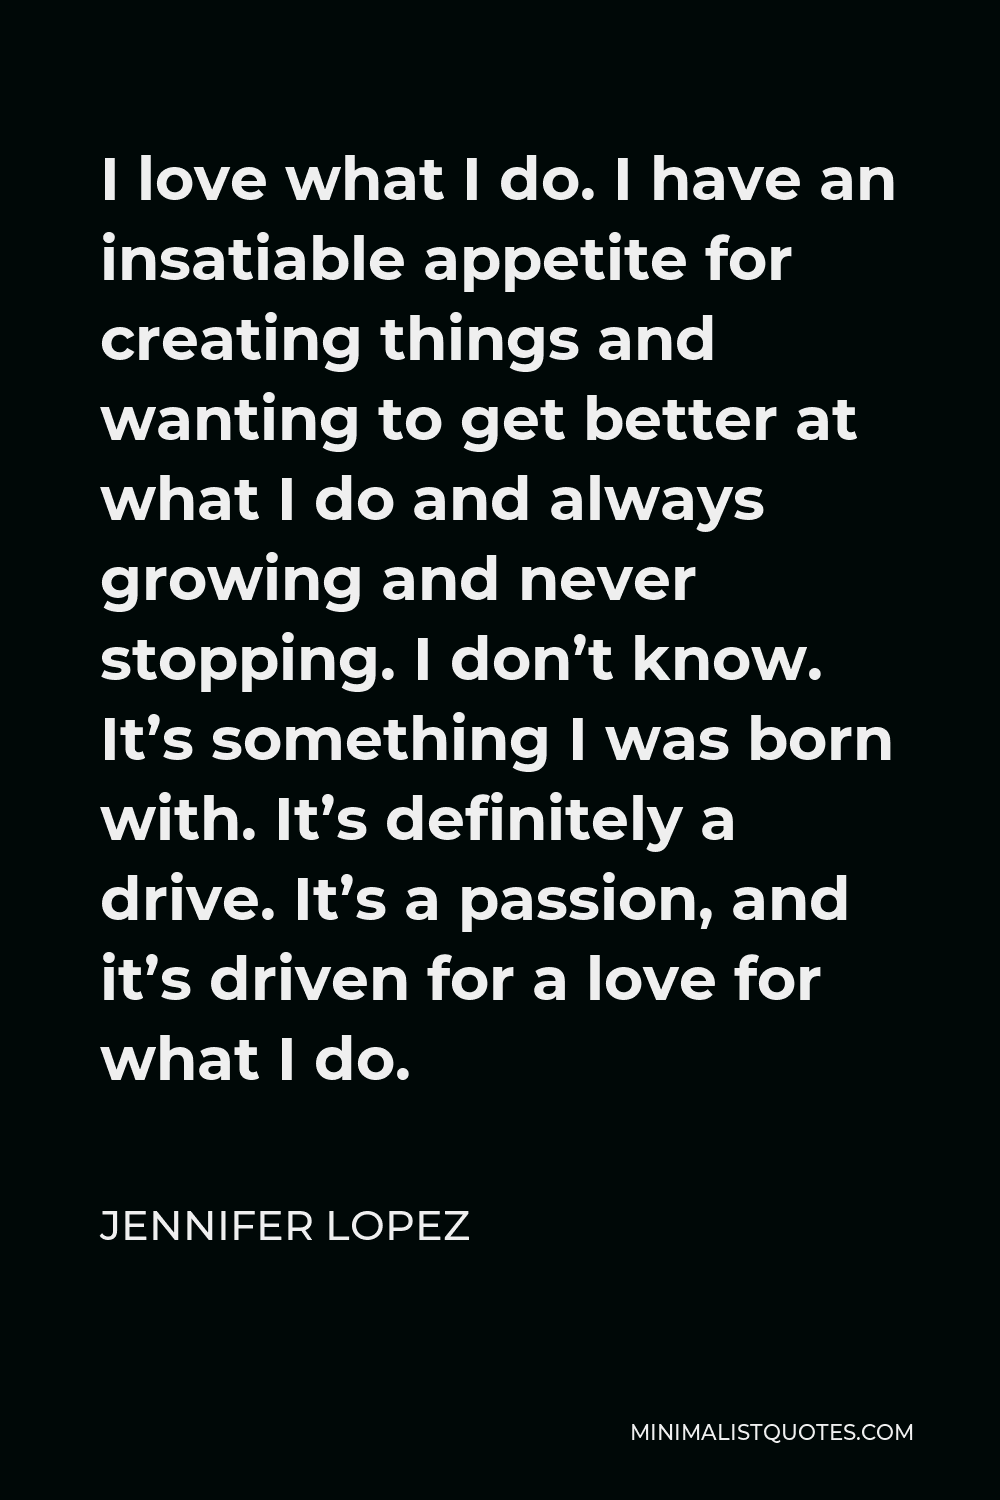 Jennifer Lopez Quote - I love what I do. I have an insatiable appetite for creating things and wanting to get better at what I do and always growing and never stopping. I don’t know. It’s something I was born with. It’s definitely a drive. It’s a passion, and it’s driven for a love for what I do.